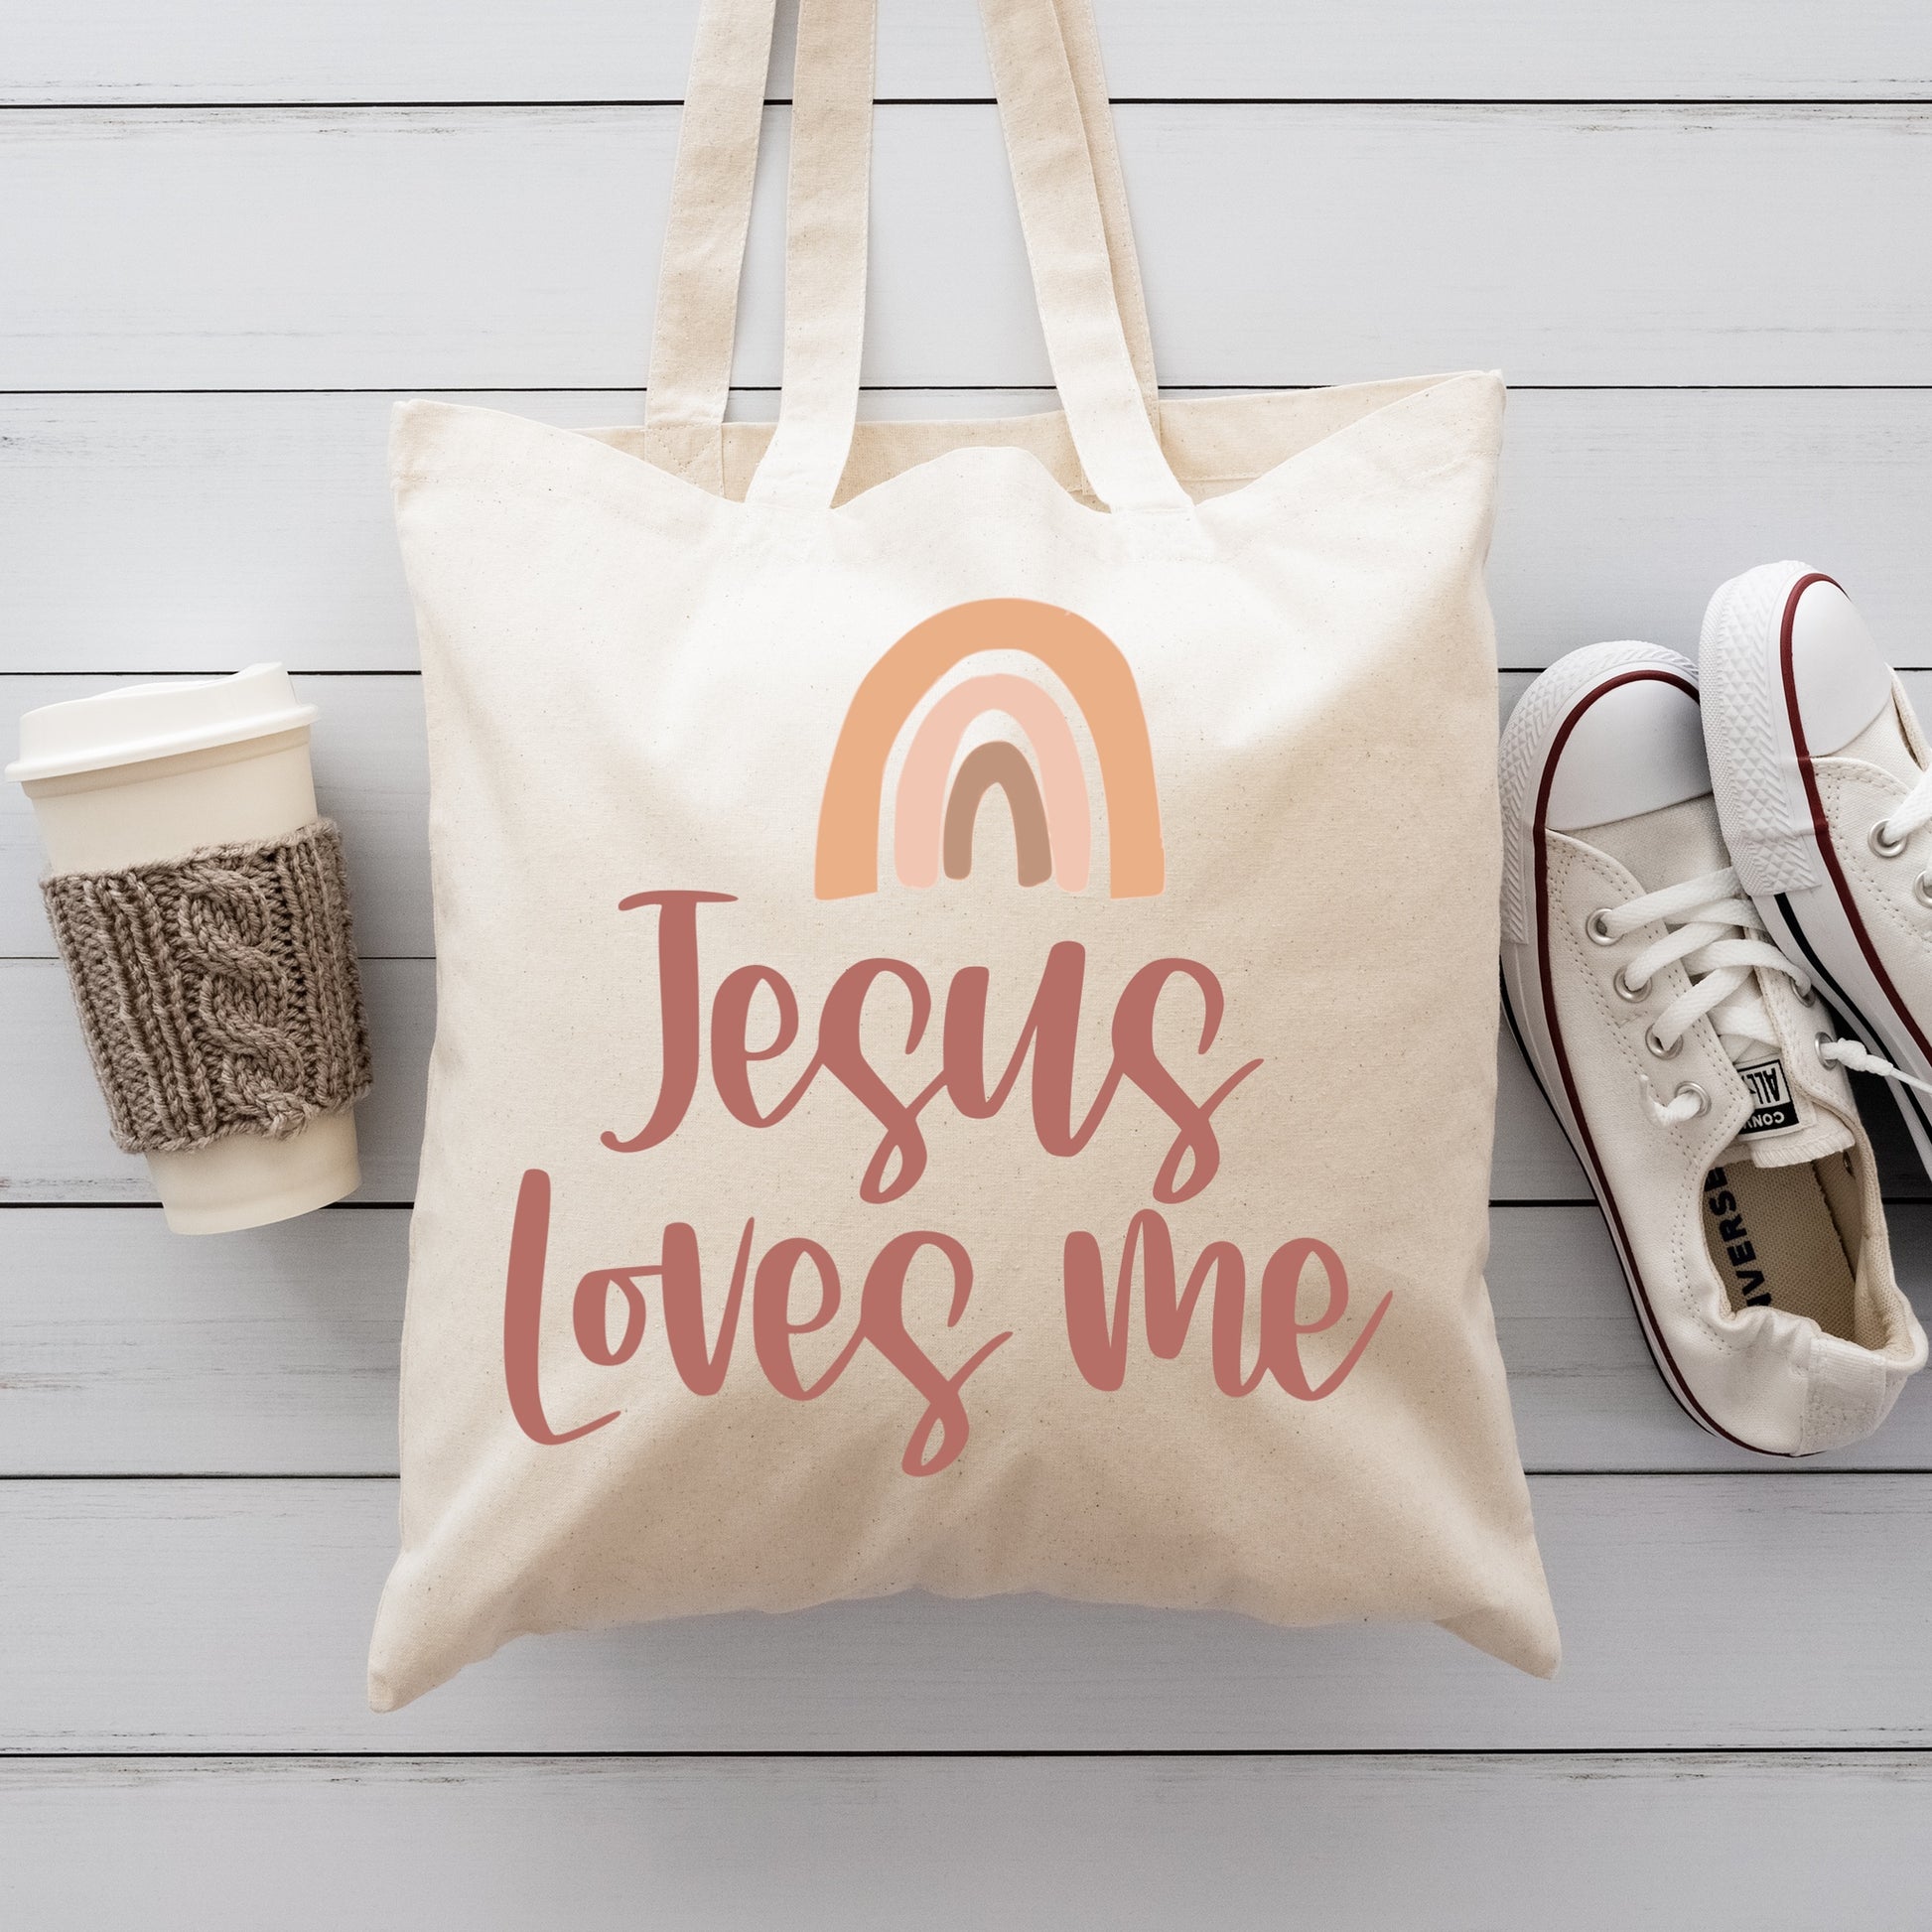 Tote Bag with a rainbow iron-on graphic that says "Jesus Loves Me" Iron on Transfer 